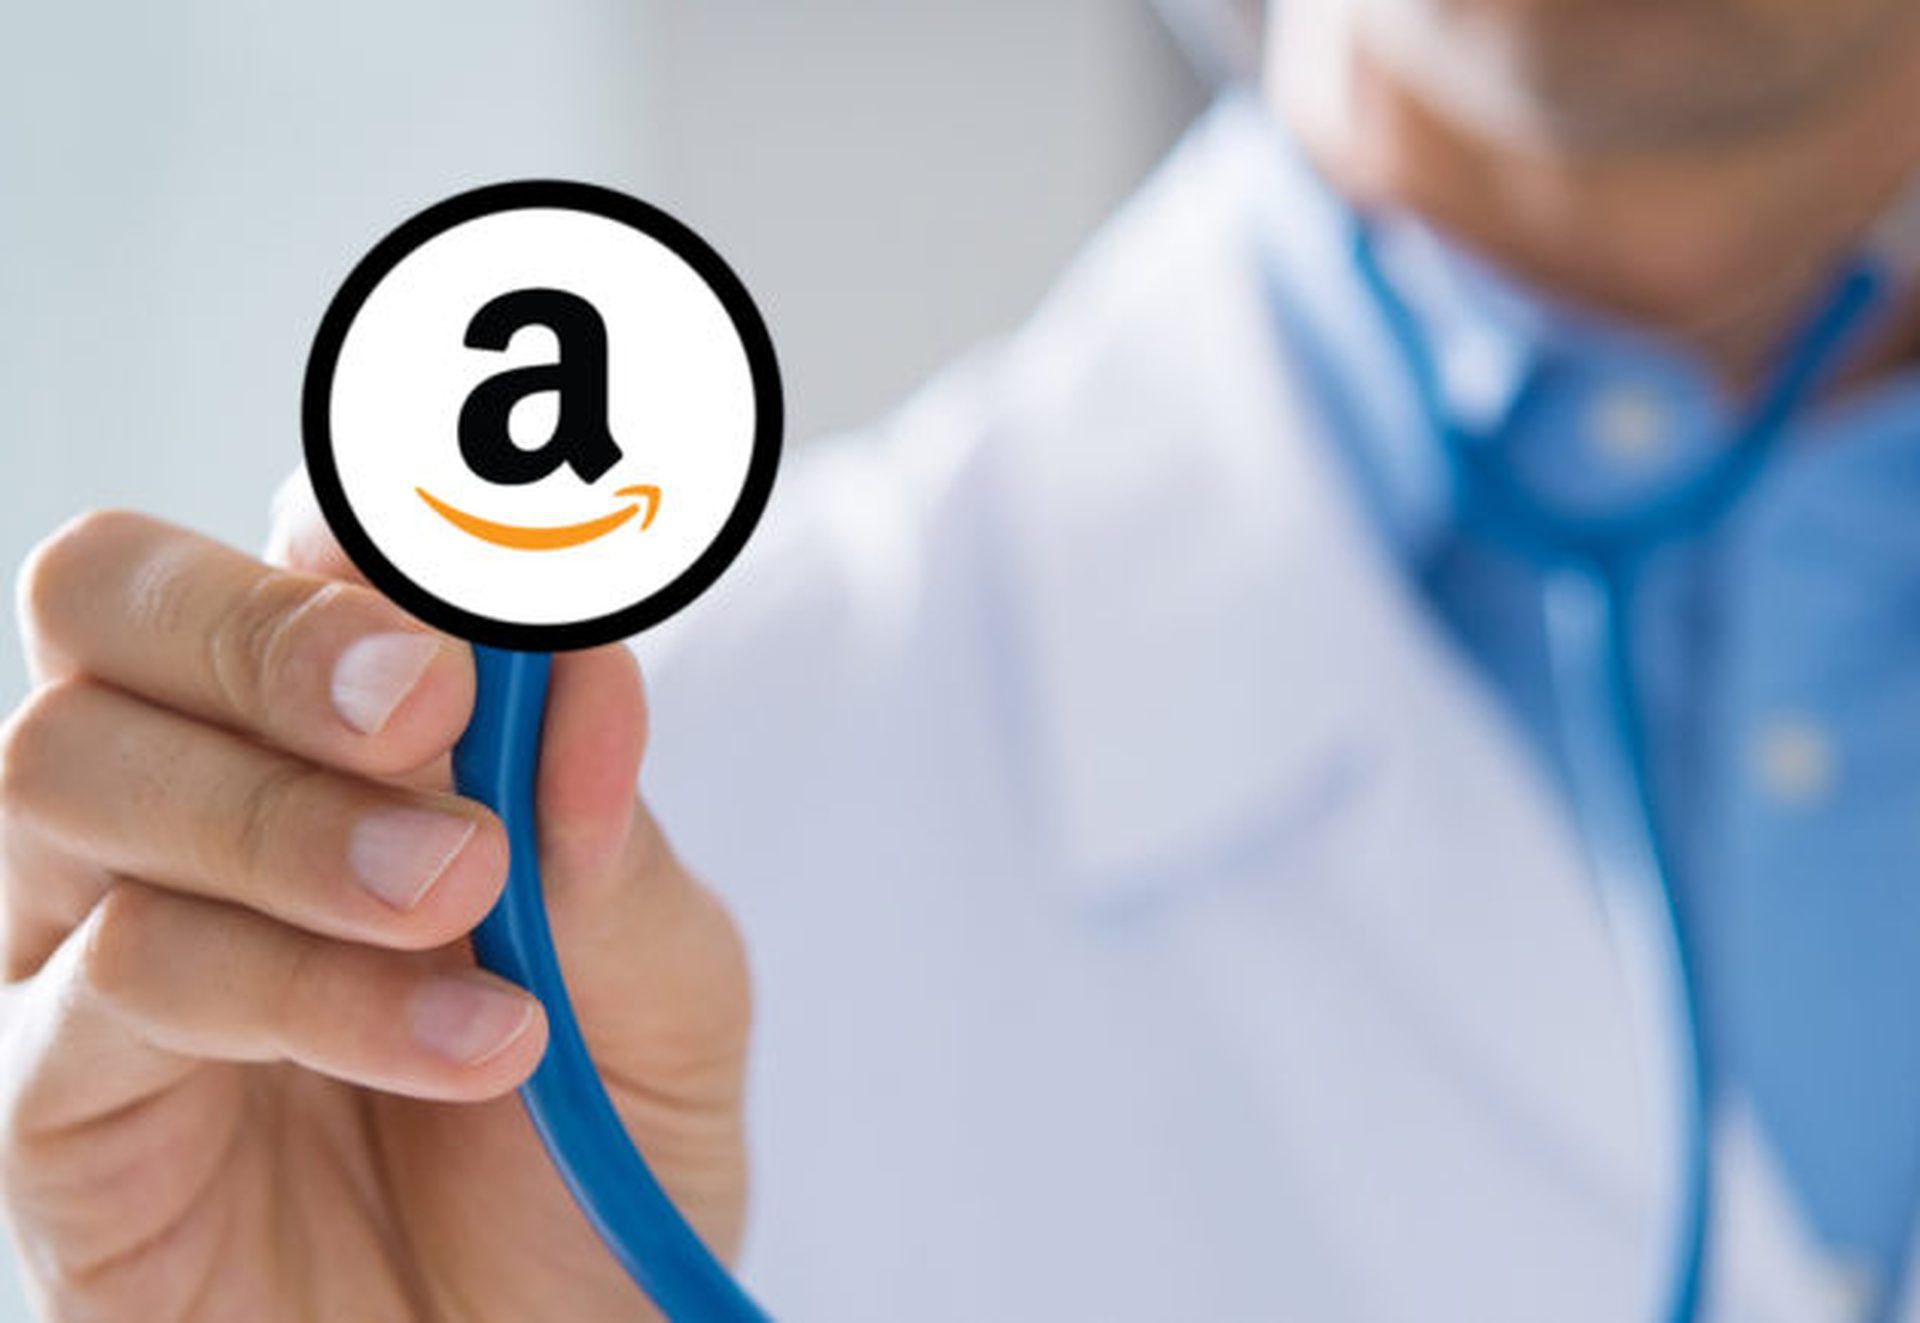 Amazon RxPass: Get your prescription medications from Amazon pharmacy